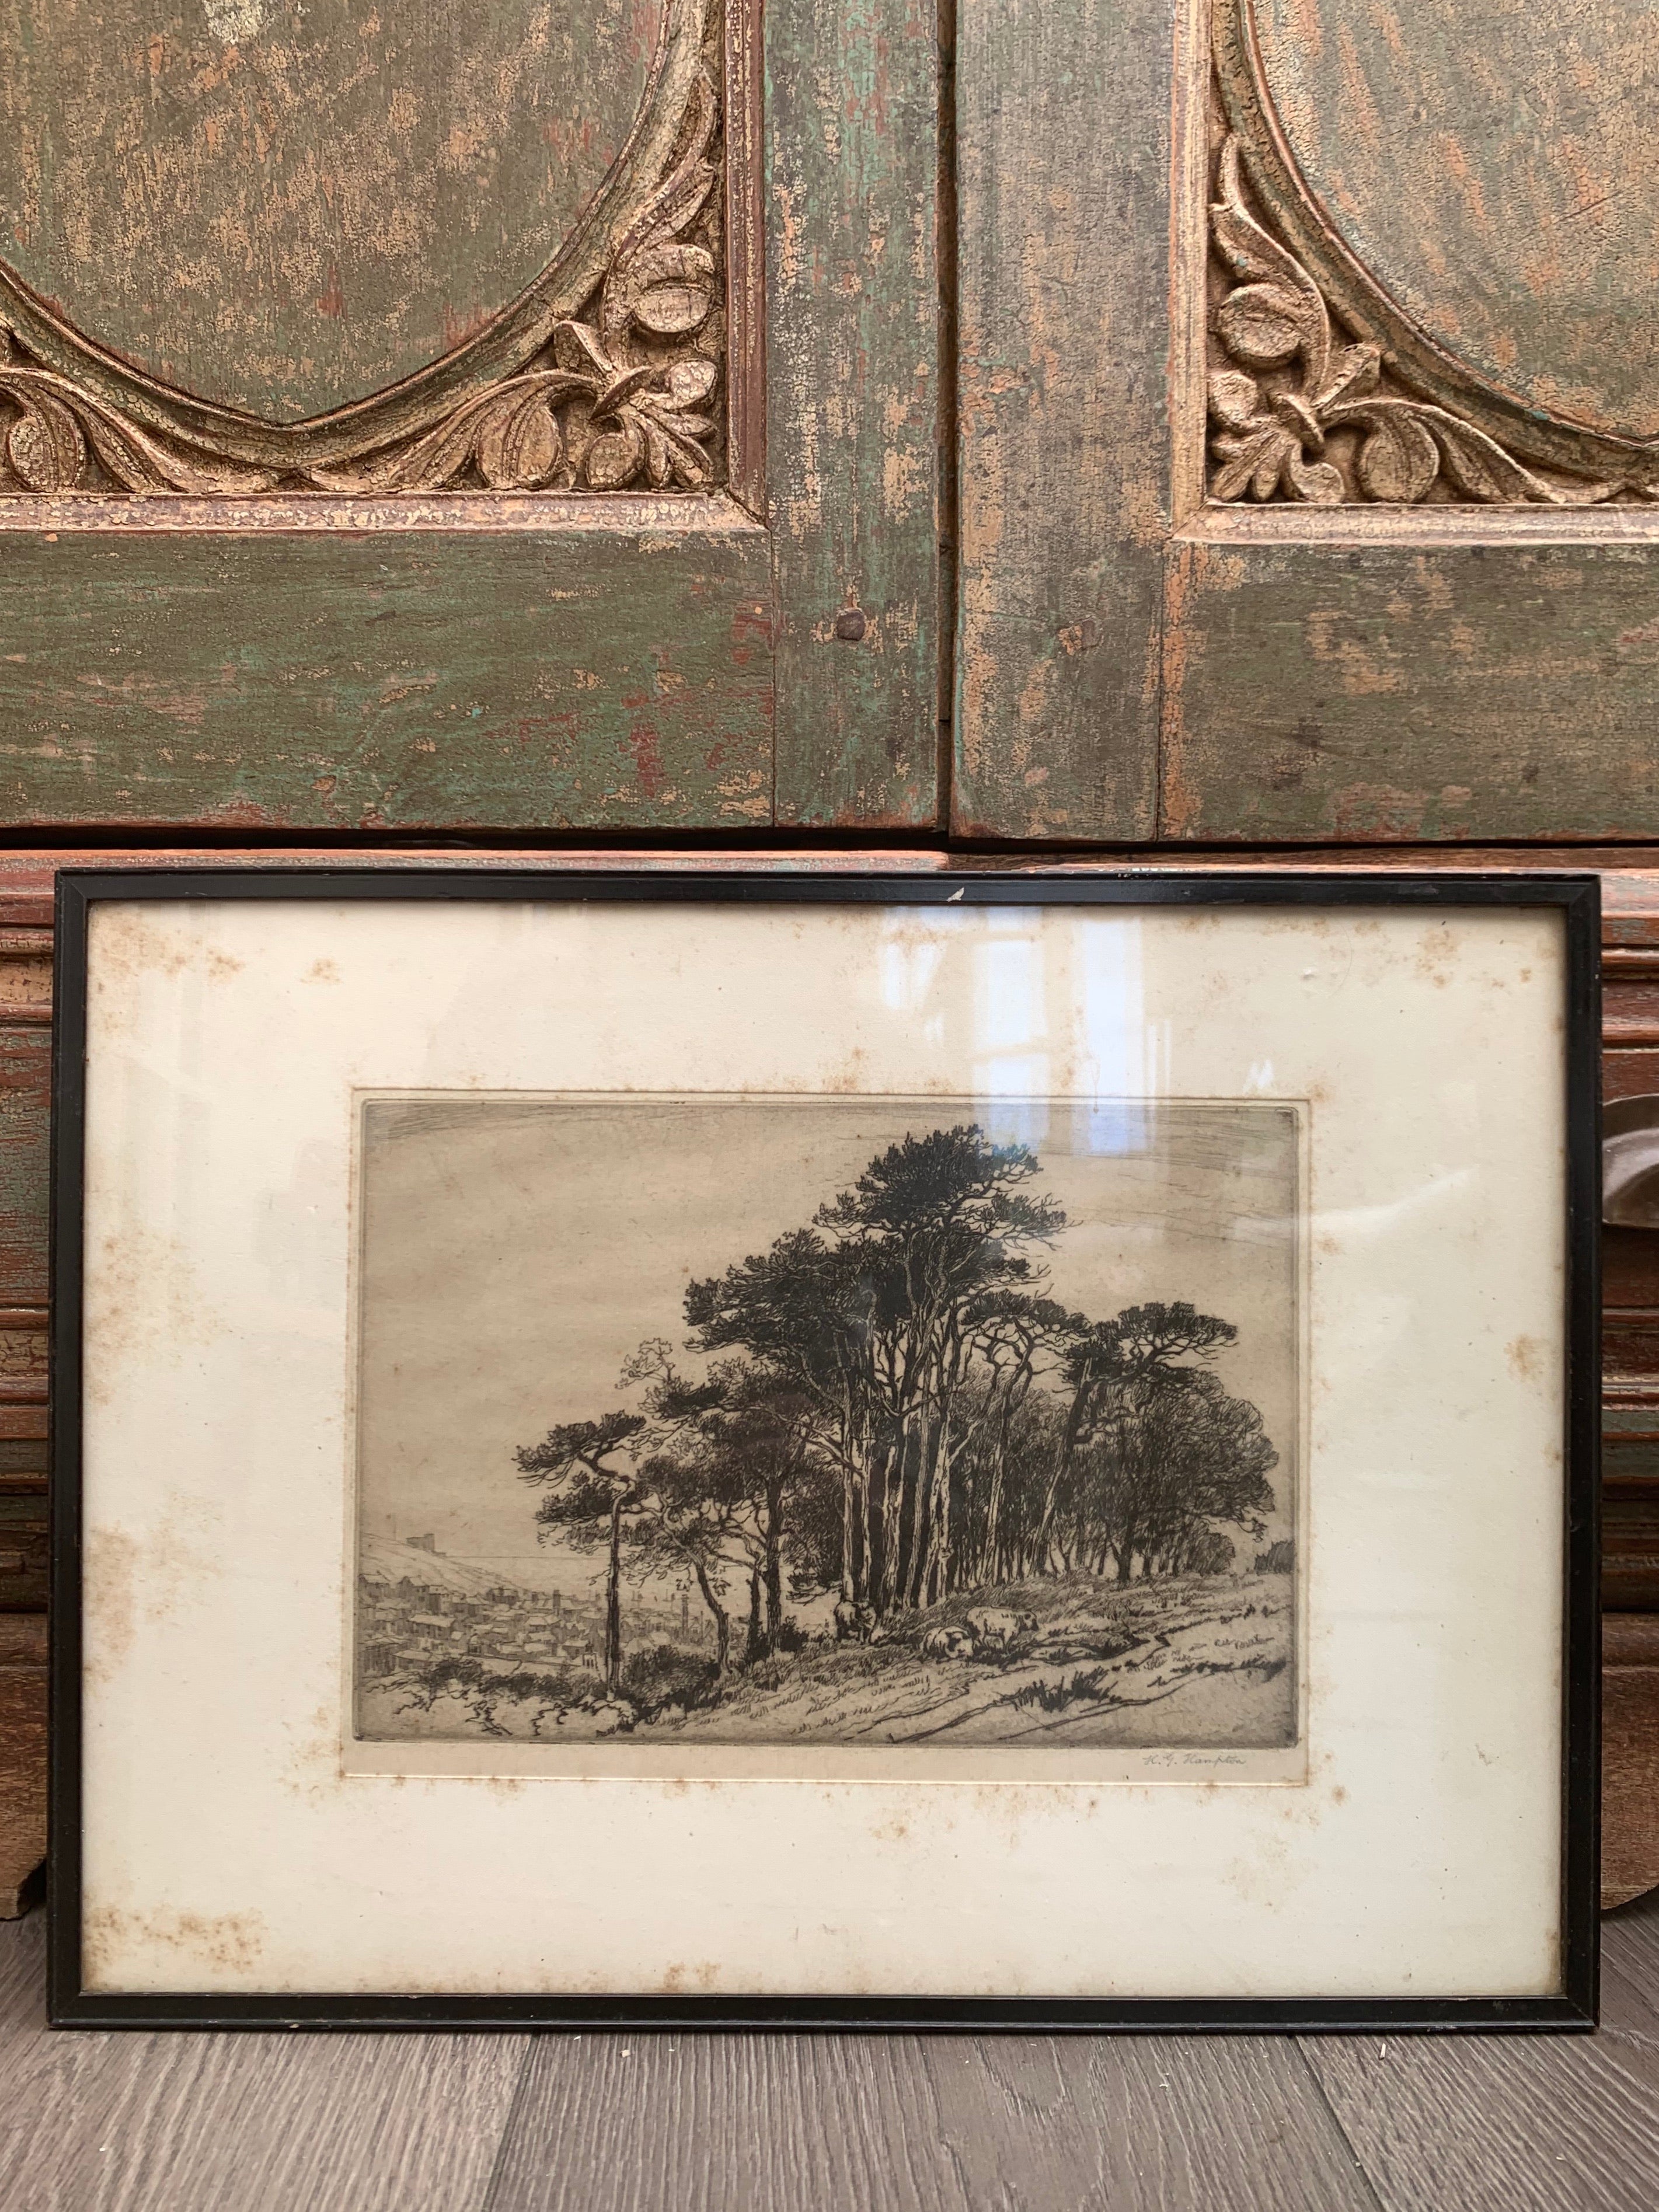 Antique Etching of Animals Sheltering under Trees